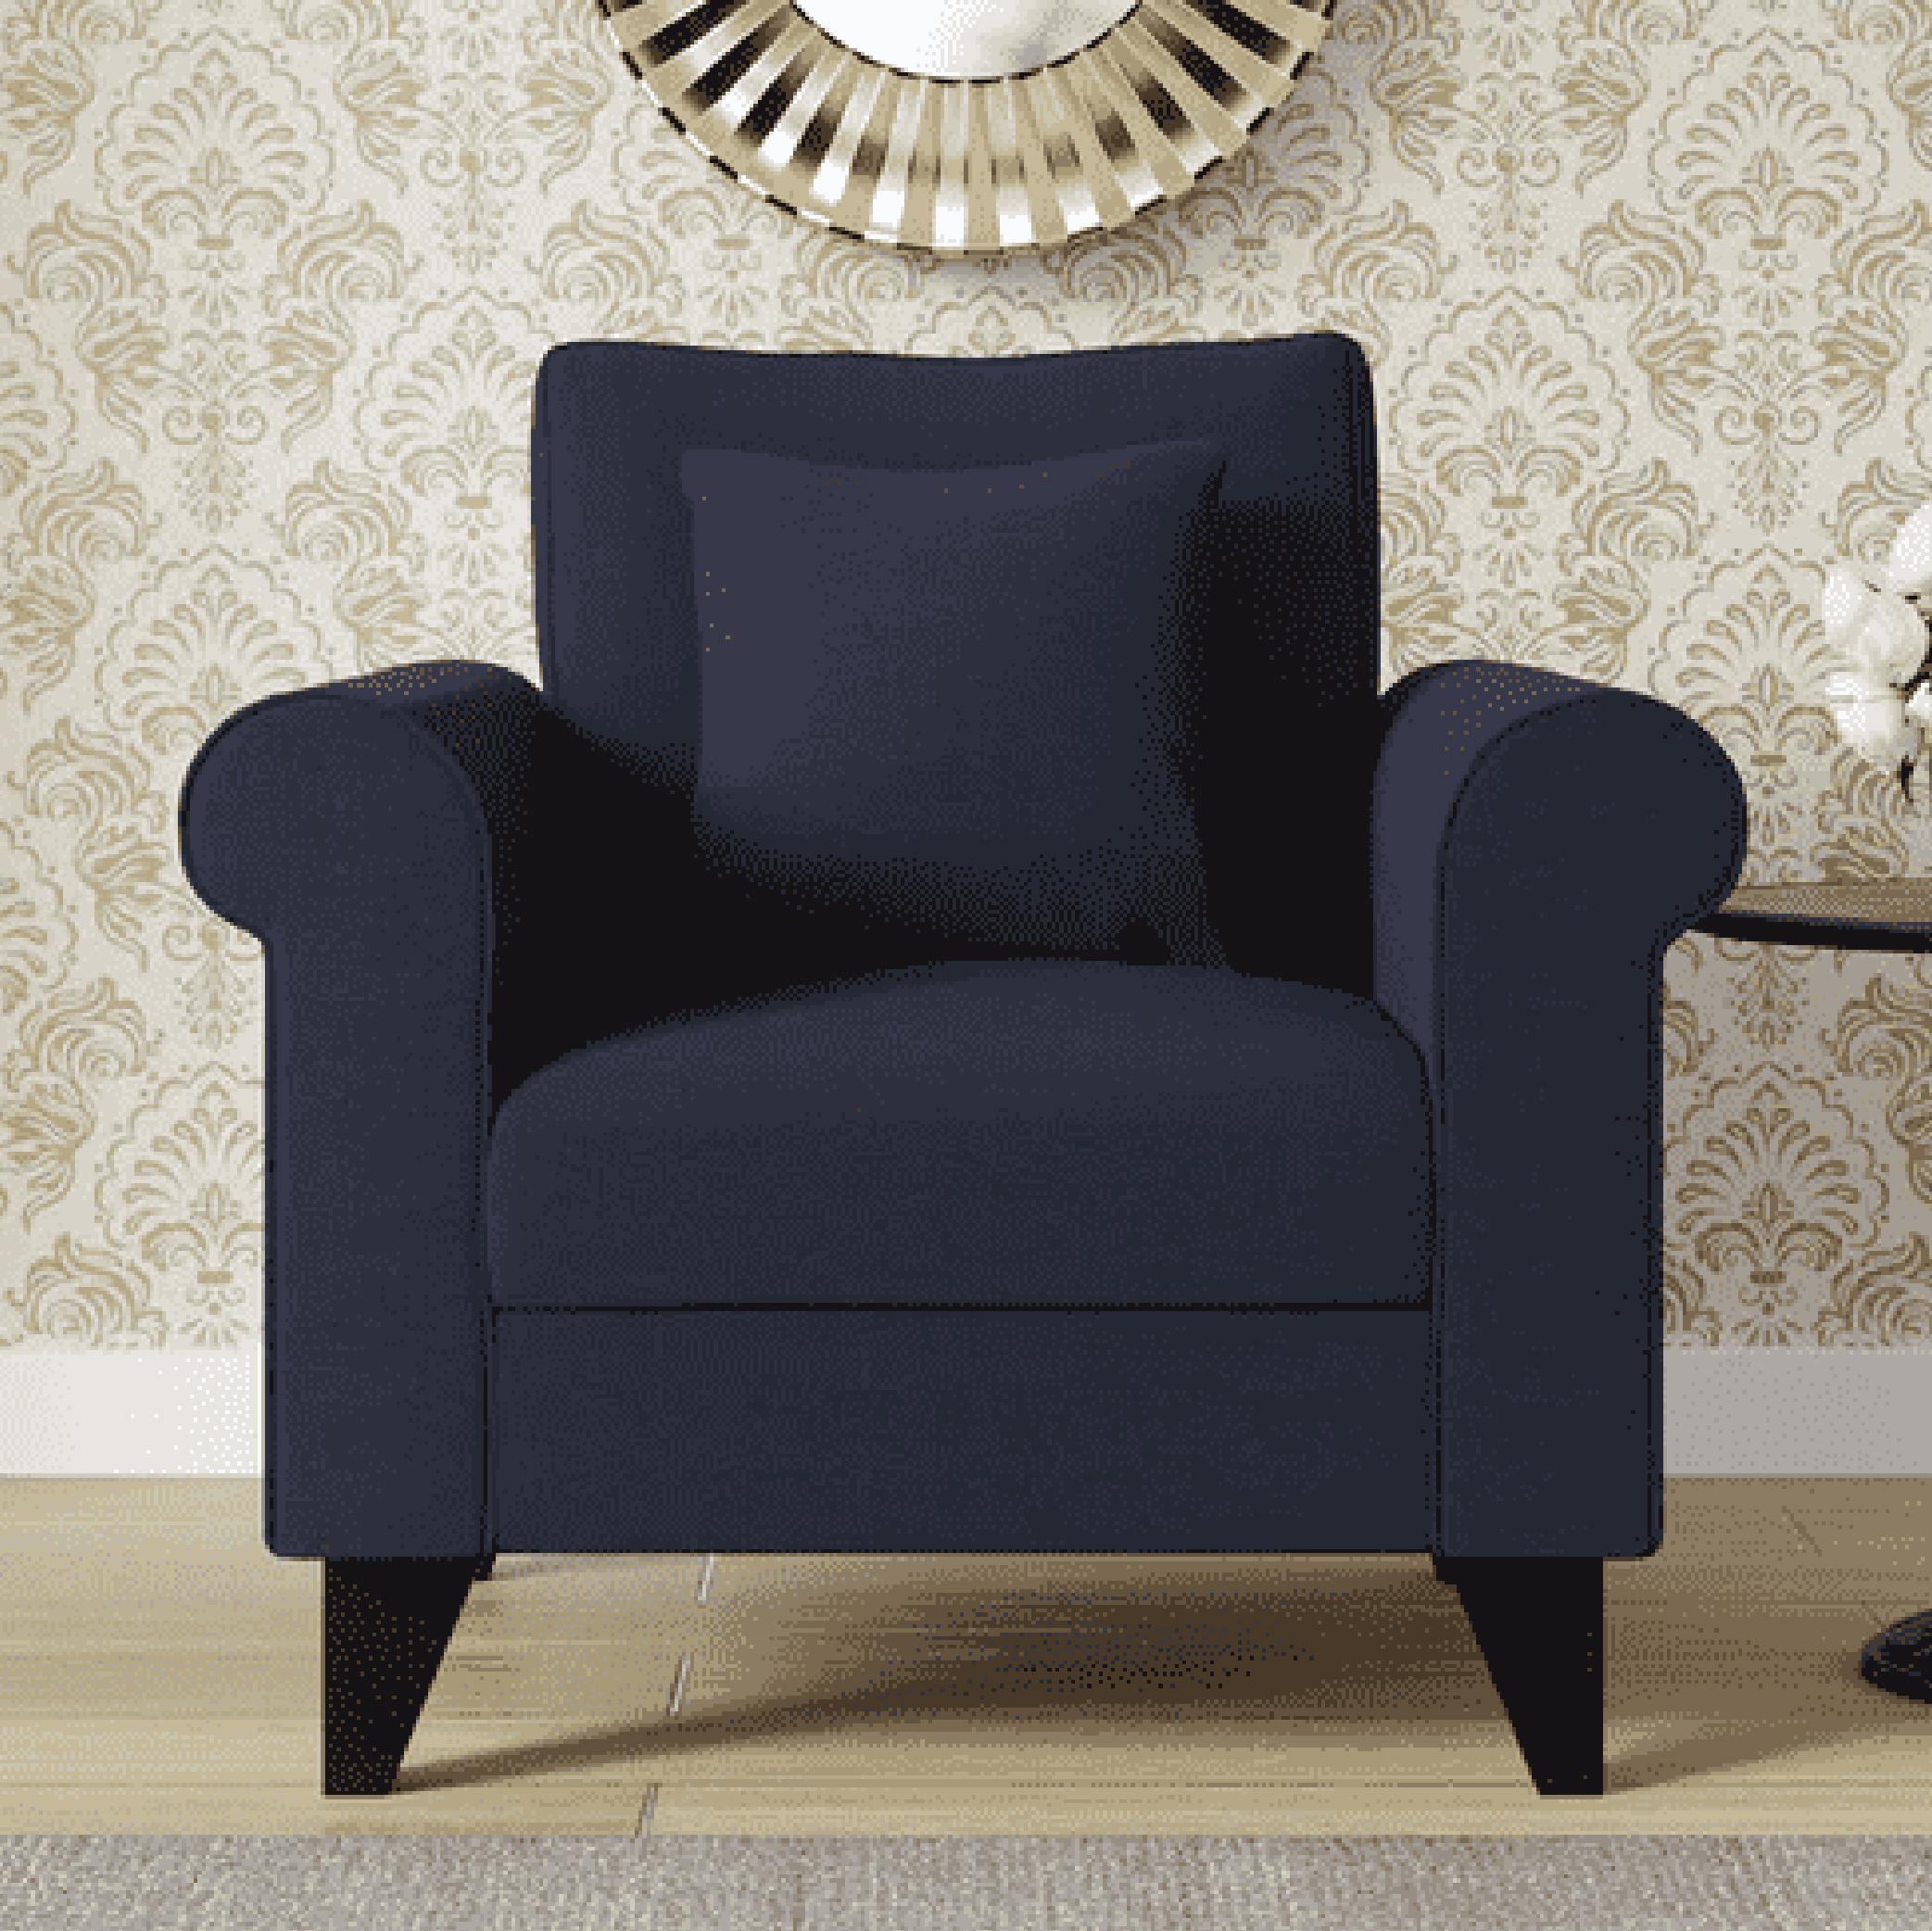 Sarno One Seater Sofa in Navy Blue Colour